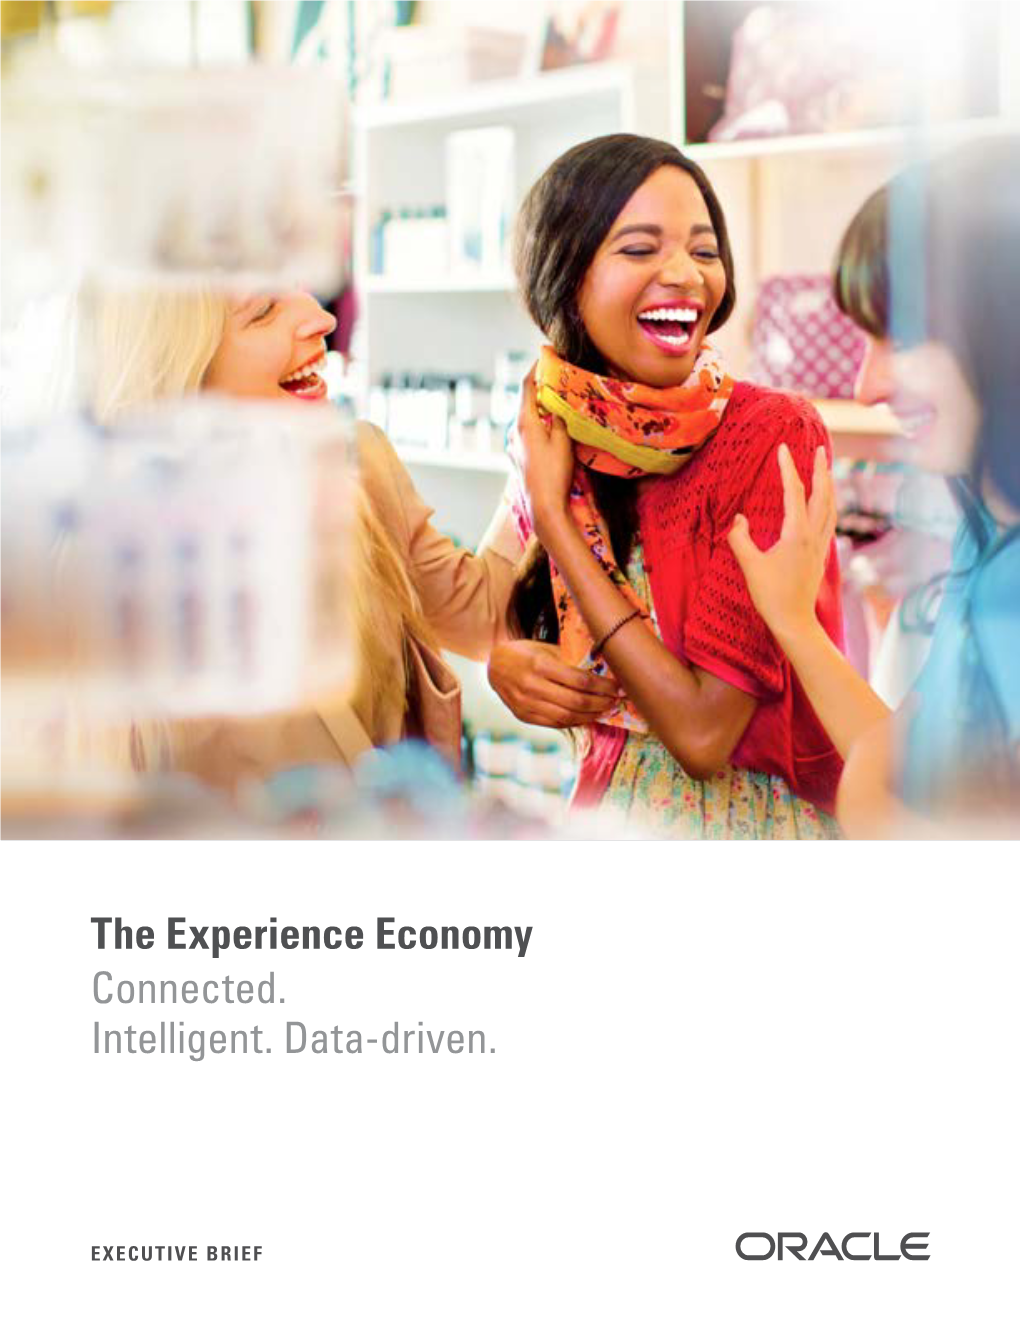 The Experience Economy Connected